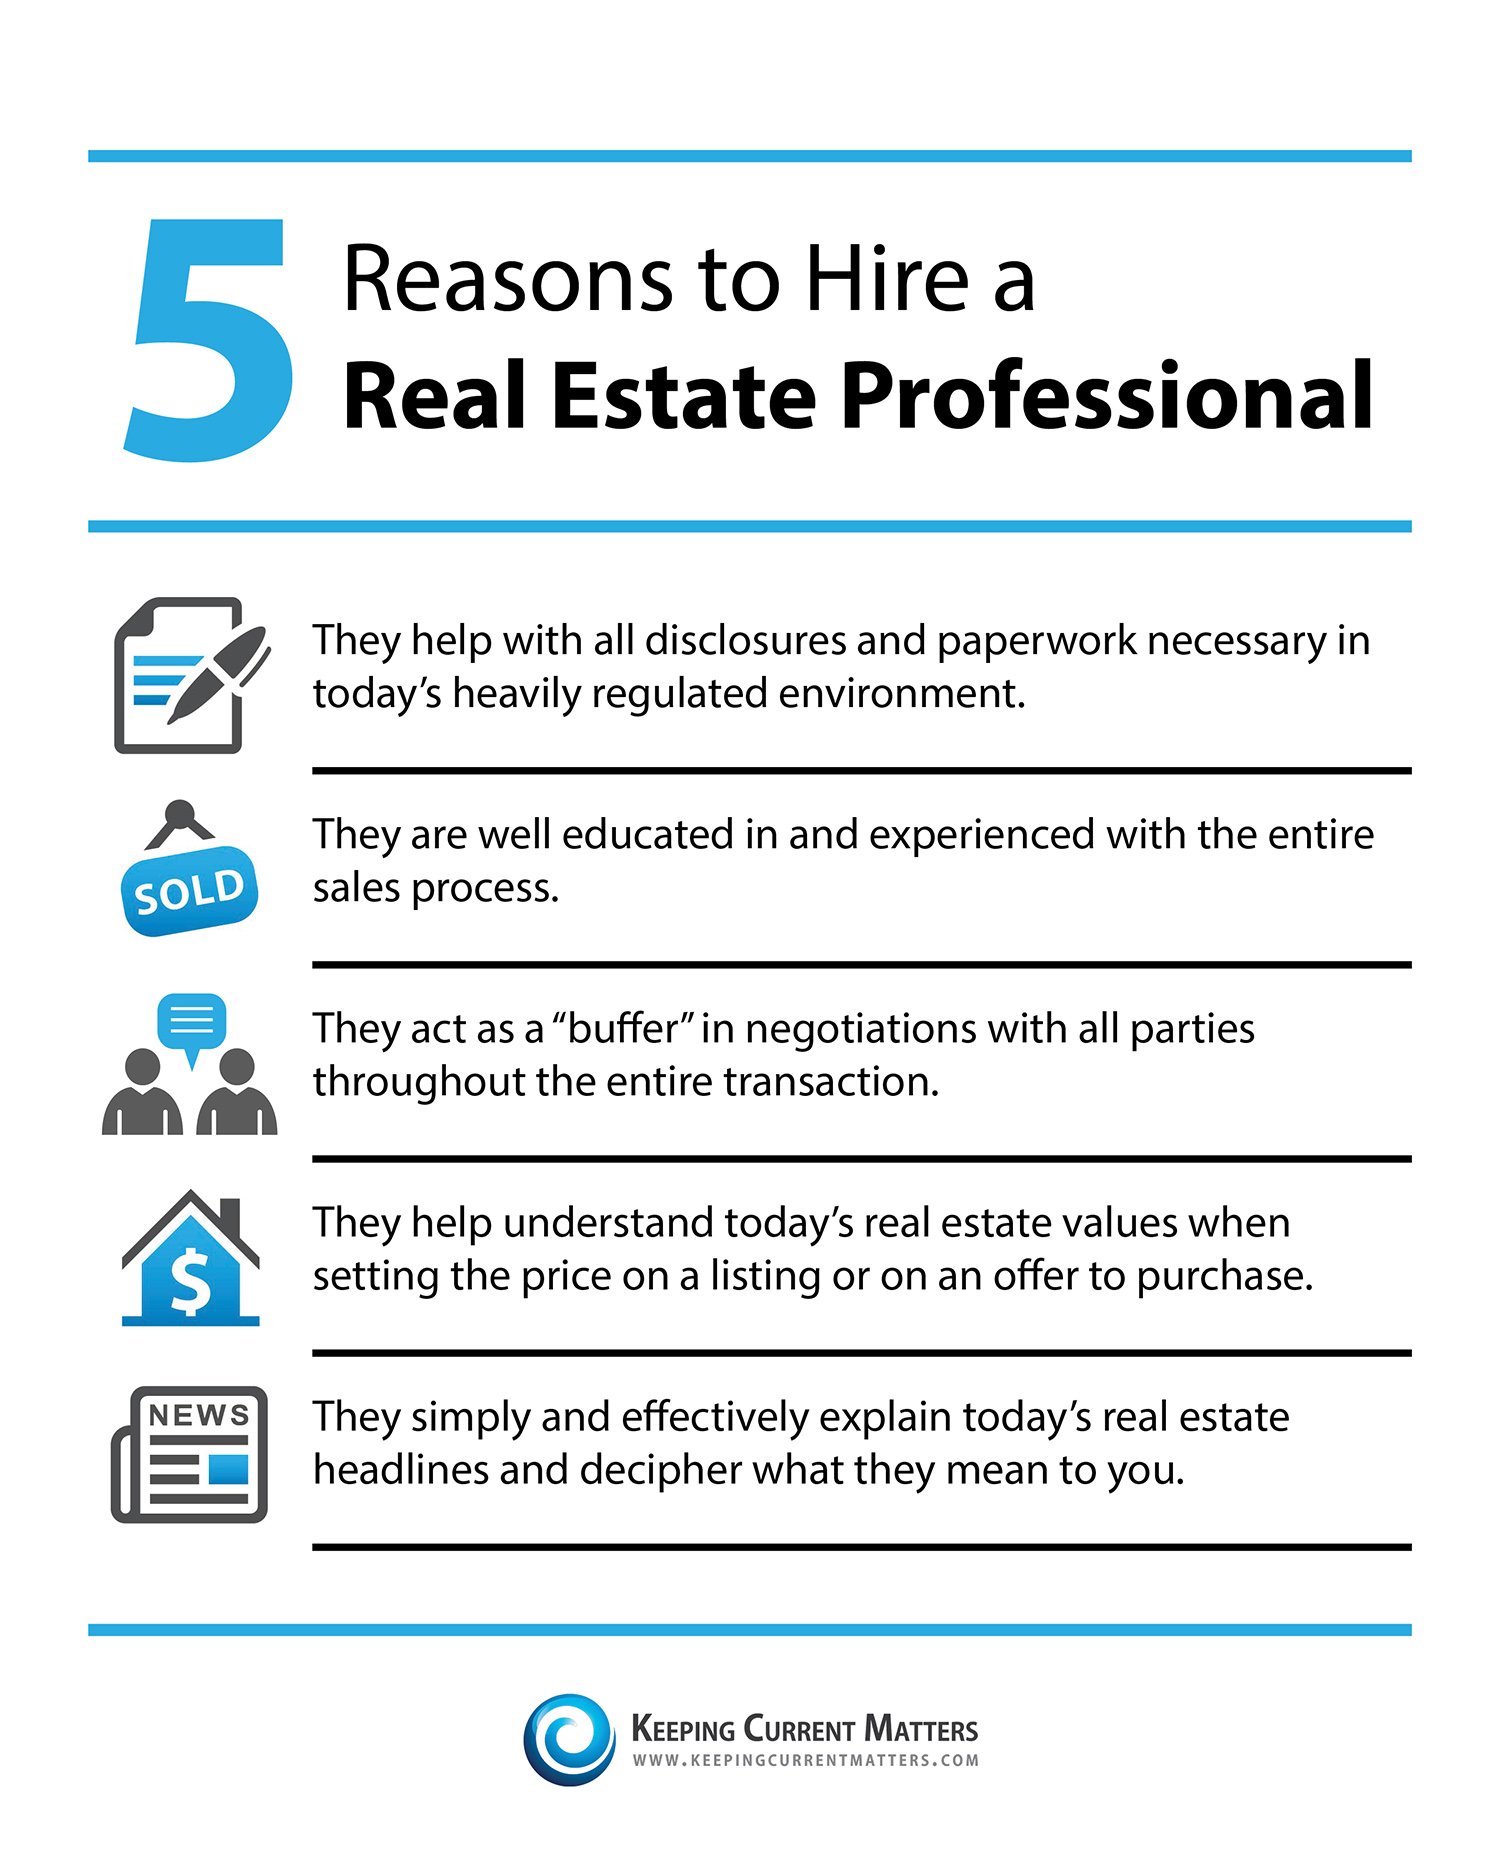 5 Reasons to Hire a Real Estate Professional | Keeping Current Matters